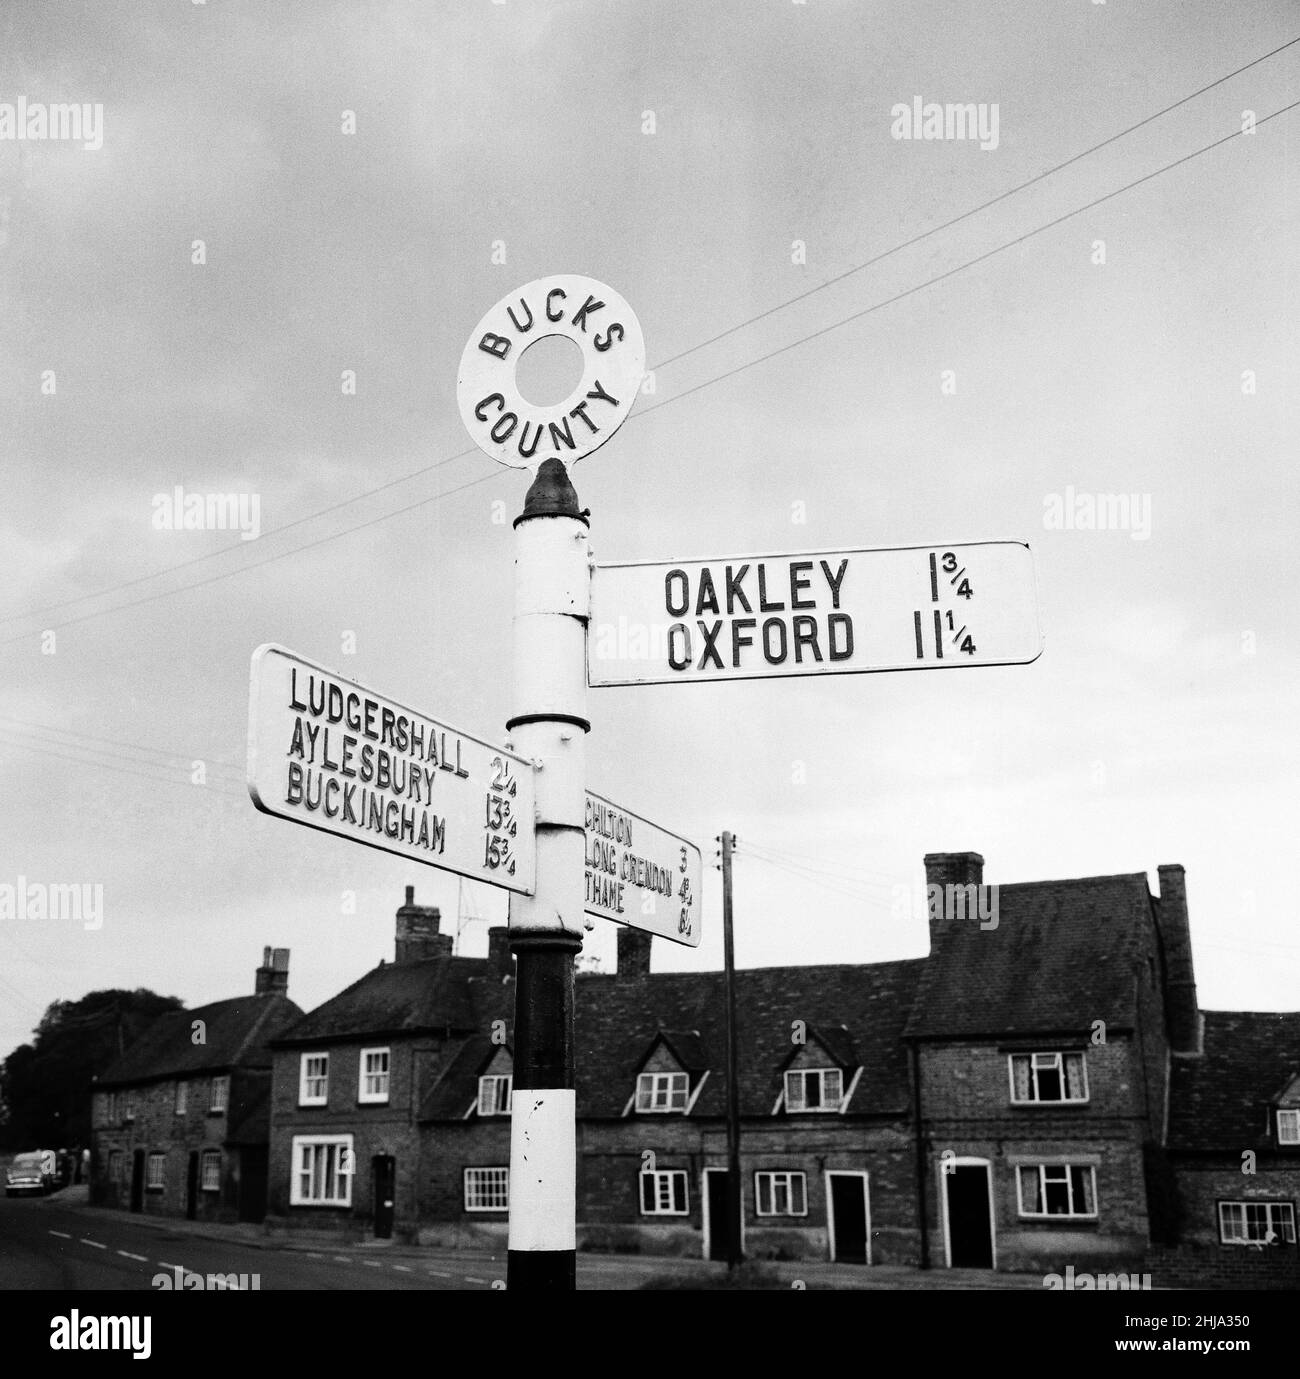 Leatherslade Farm, between Oakley and Brill in Buckinghamshire, hideout used by gang, 27 miles from the crime scene, Tuesday 13th August 1963. Our Picture Shows ... sign for Oakley, in Bucks County.  The 1963 Great Train Robbery was the robbery of 2.6 million pounds from a Royal Mail train heading from Glasgow to London on the West Coast Main Line in the early hours of 8th August 1963, at Bridego Railway Bridge, Ledburn, near Mentmore in  Buckinghamshire, England. Stock Photo